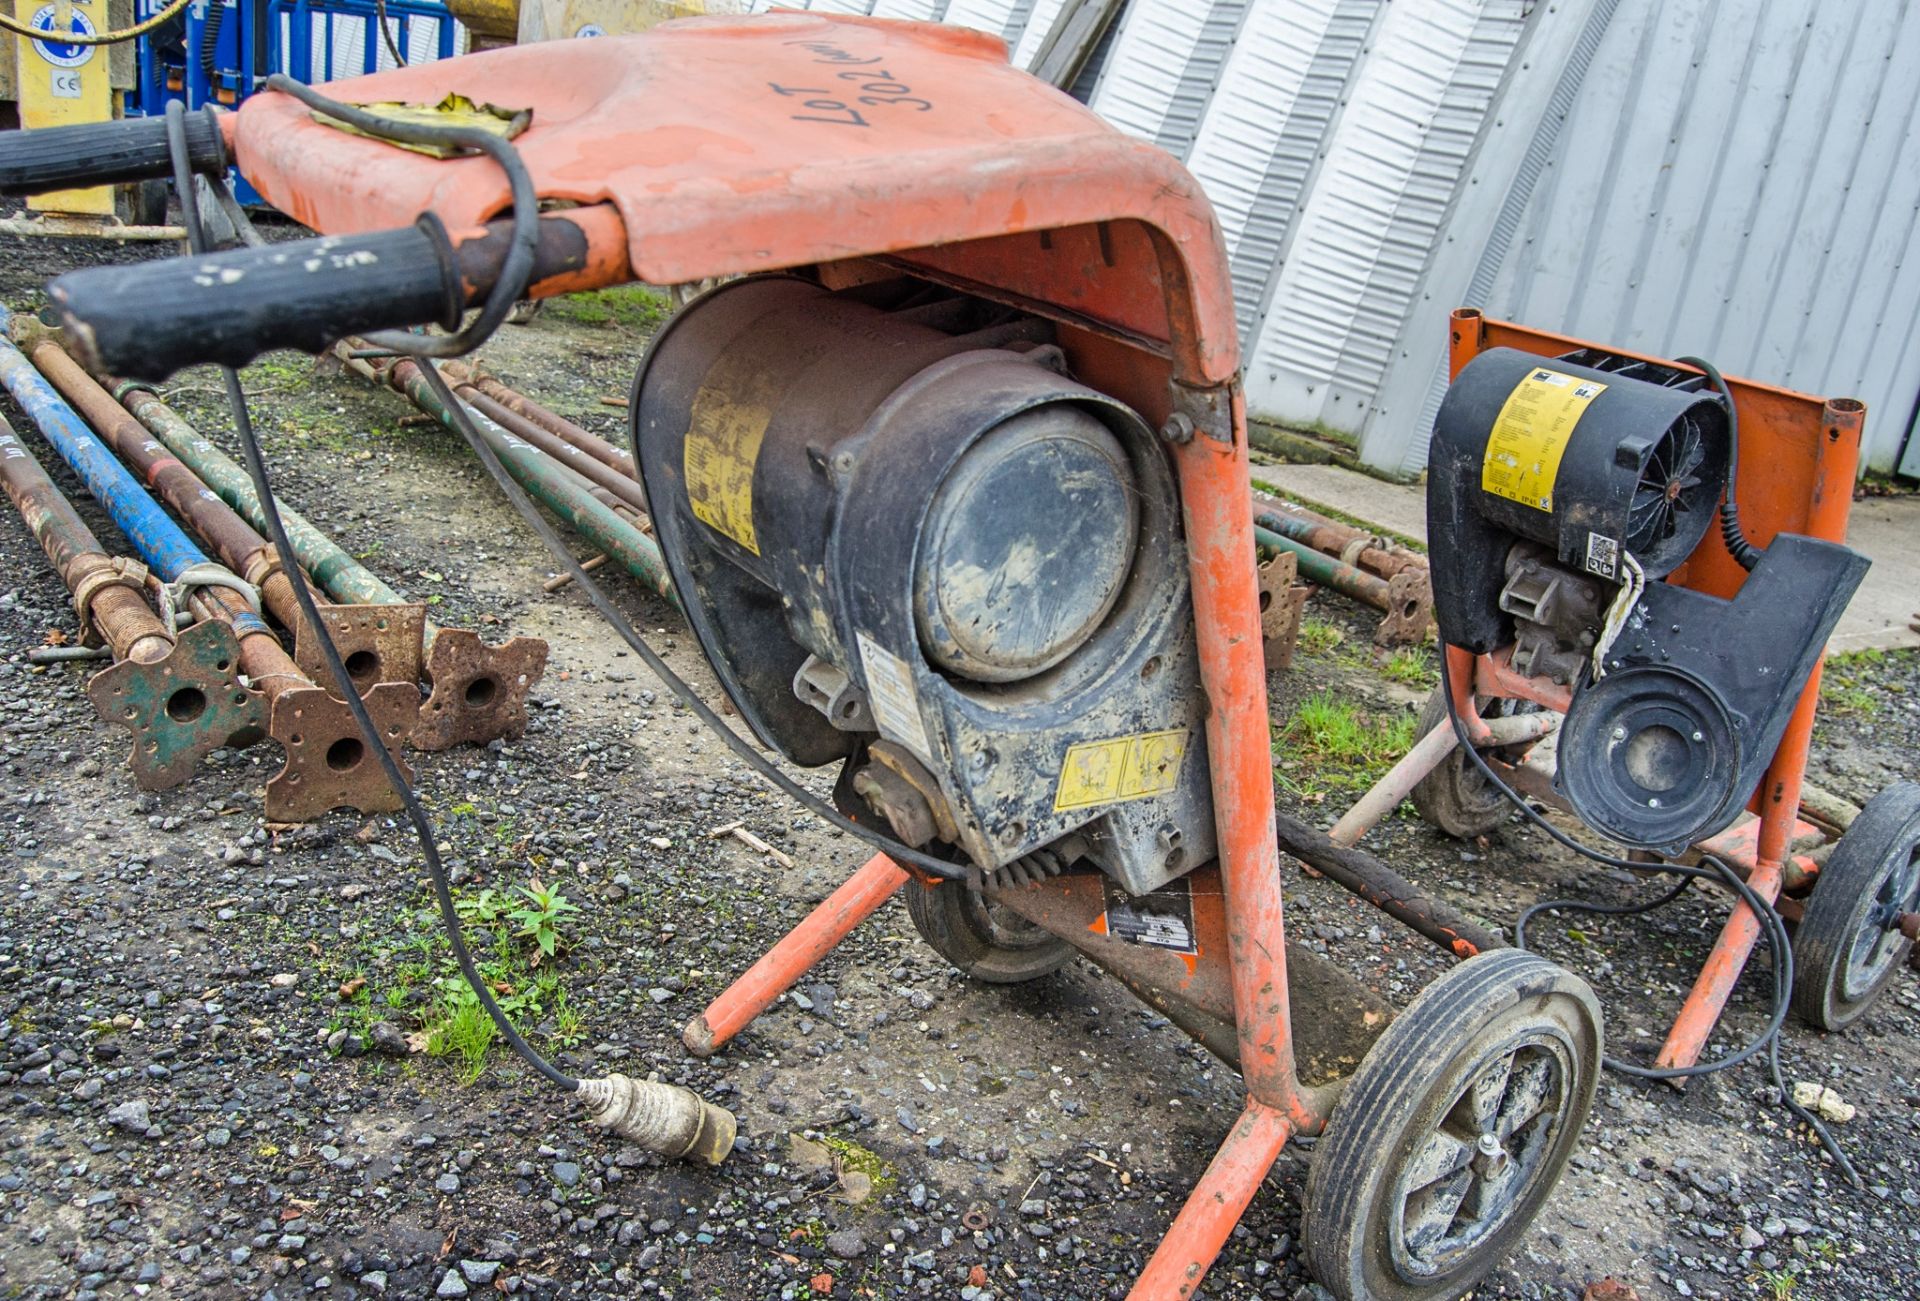 2 - Belle Minimix 150 110v cement mixers ** Both with no drums and one with motor parts missing ** - Image 2 of 3